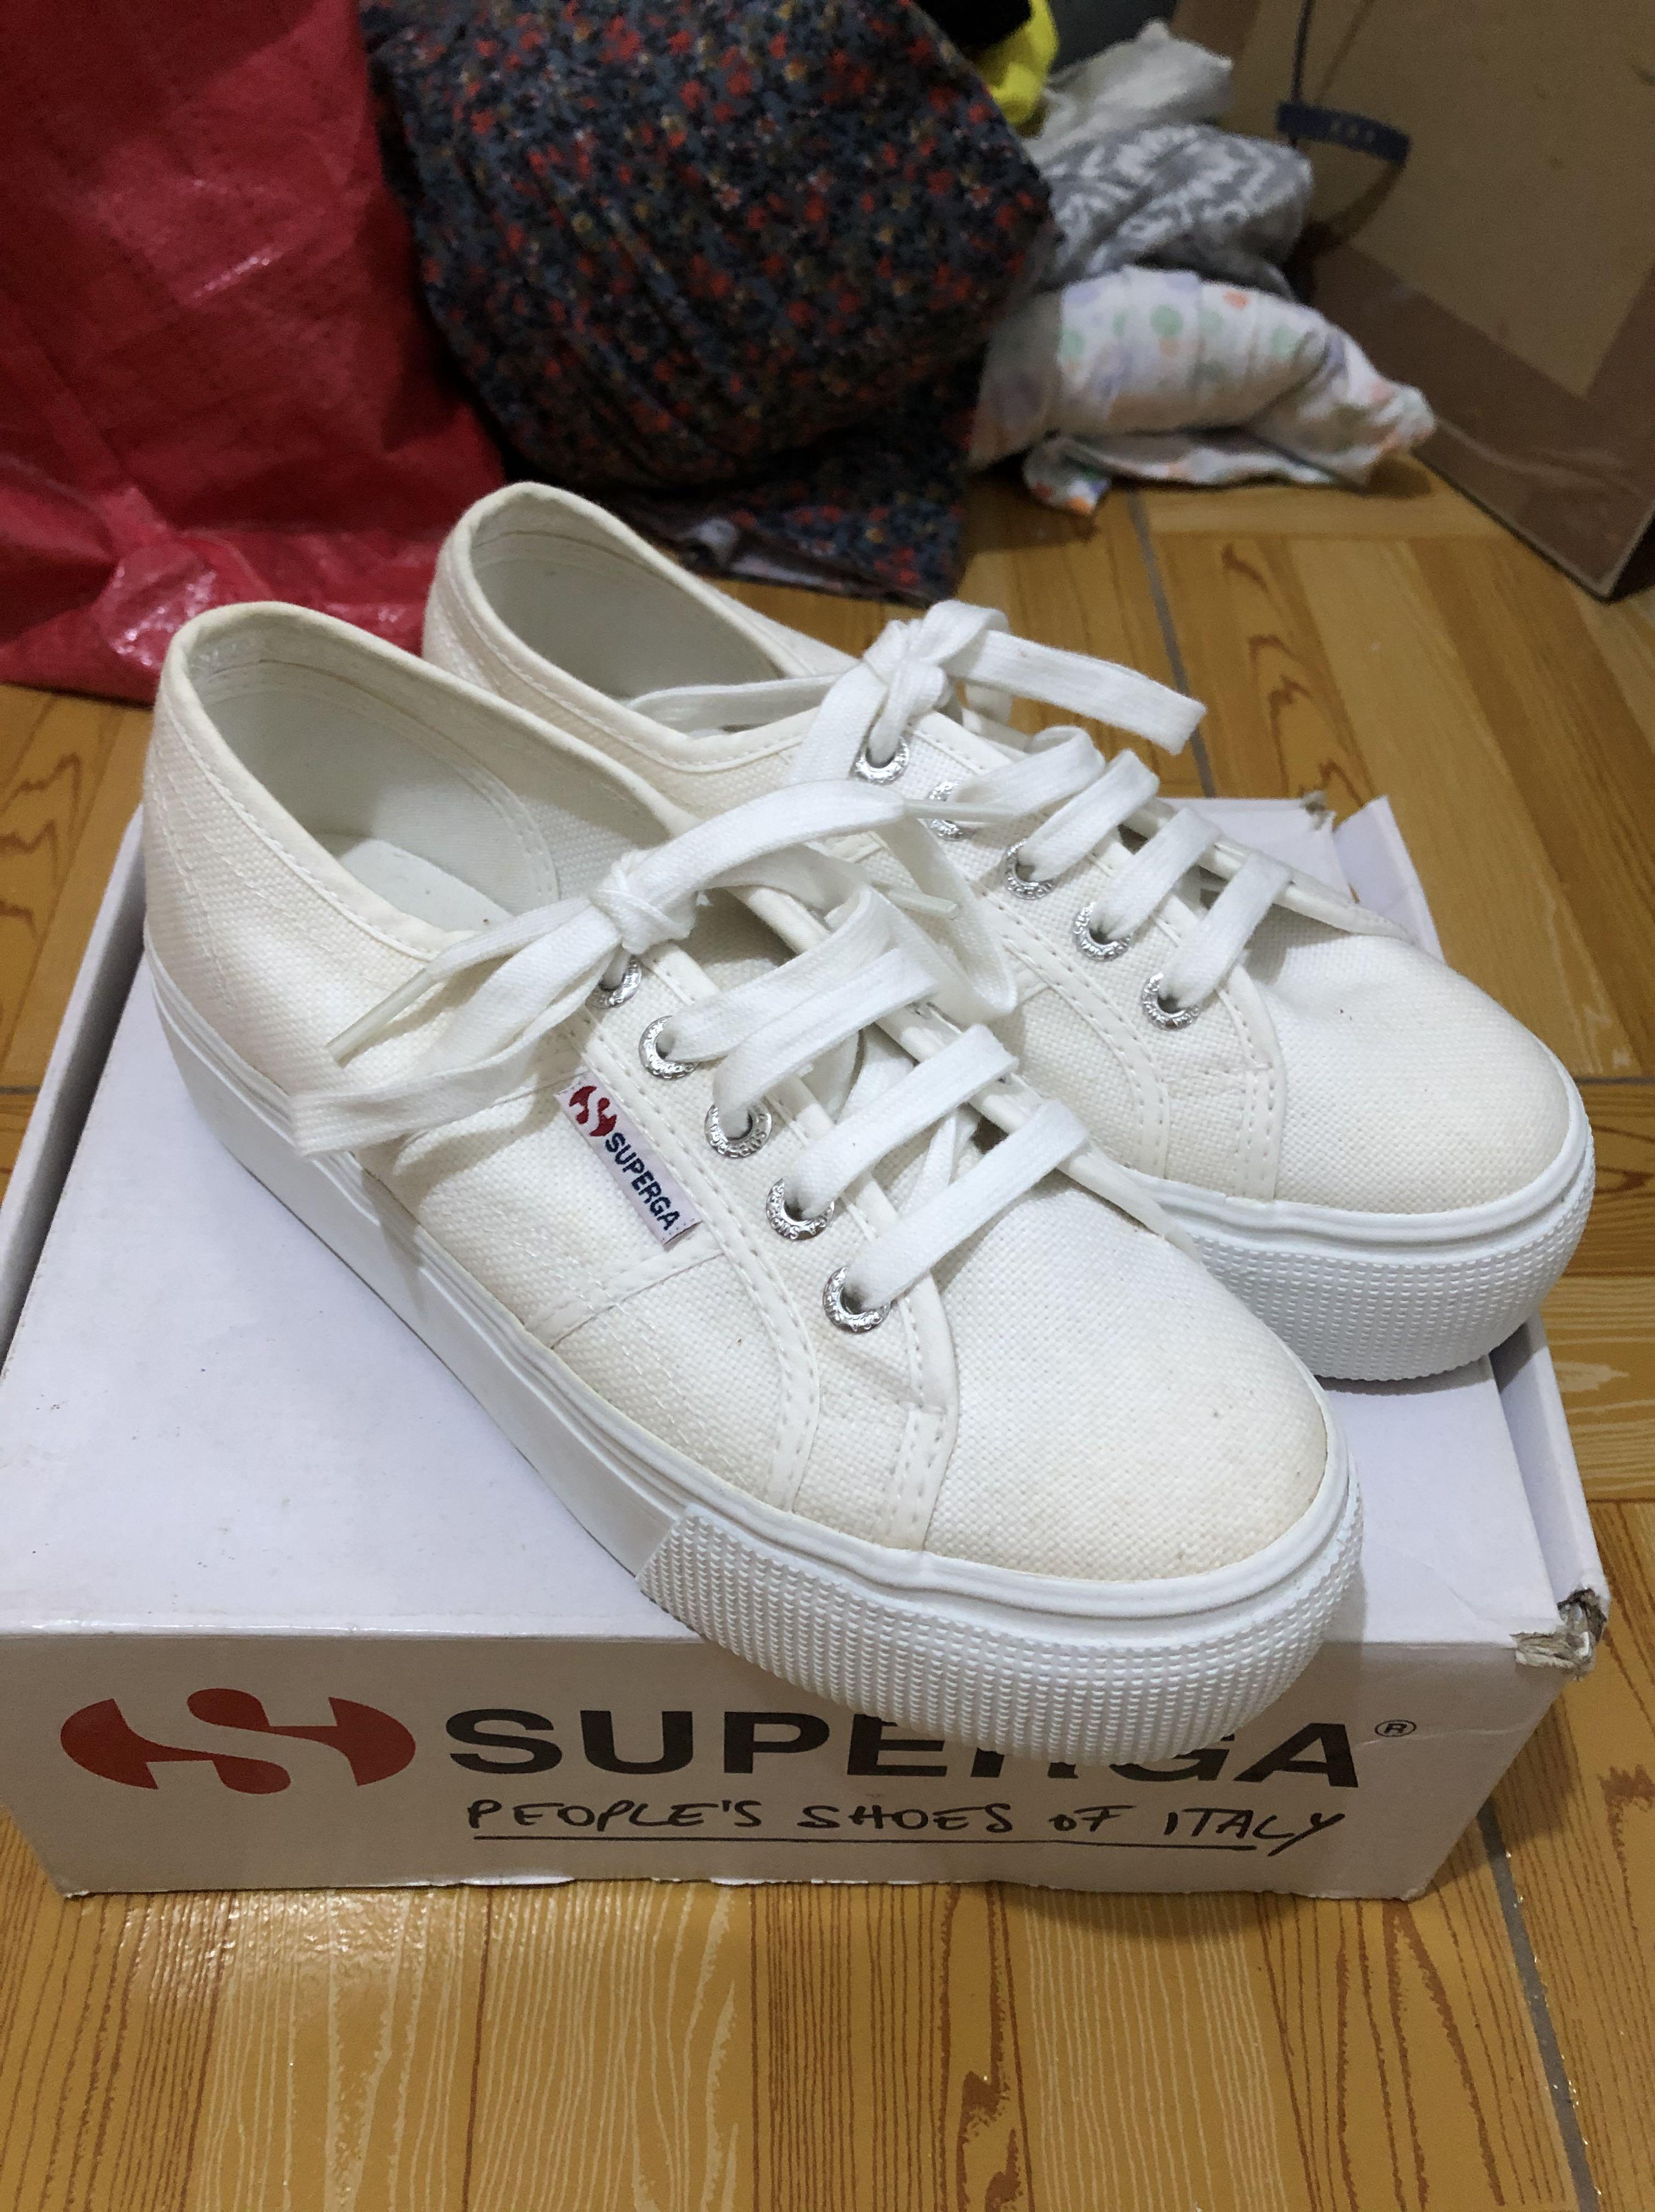 superga acotw linea up and down